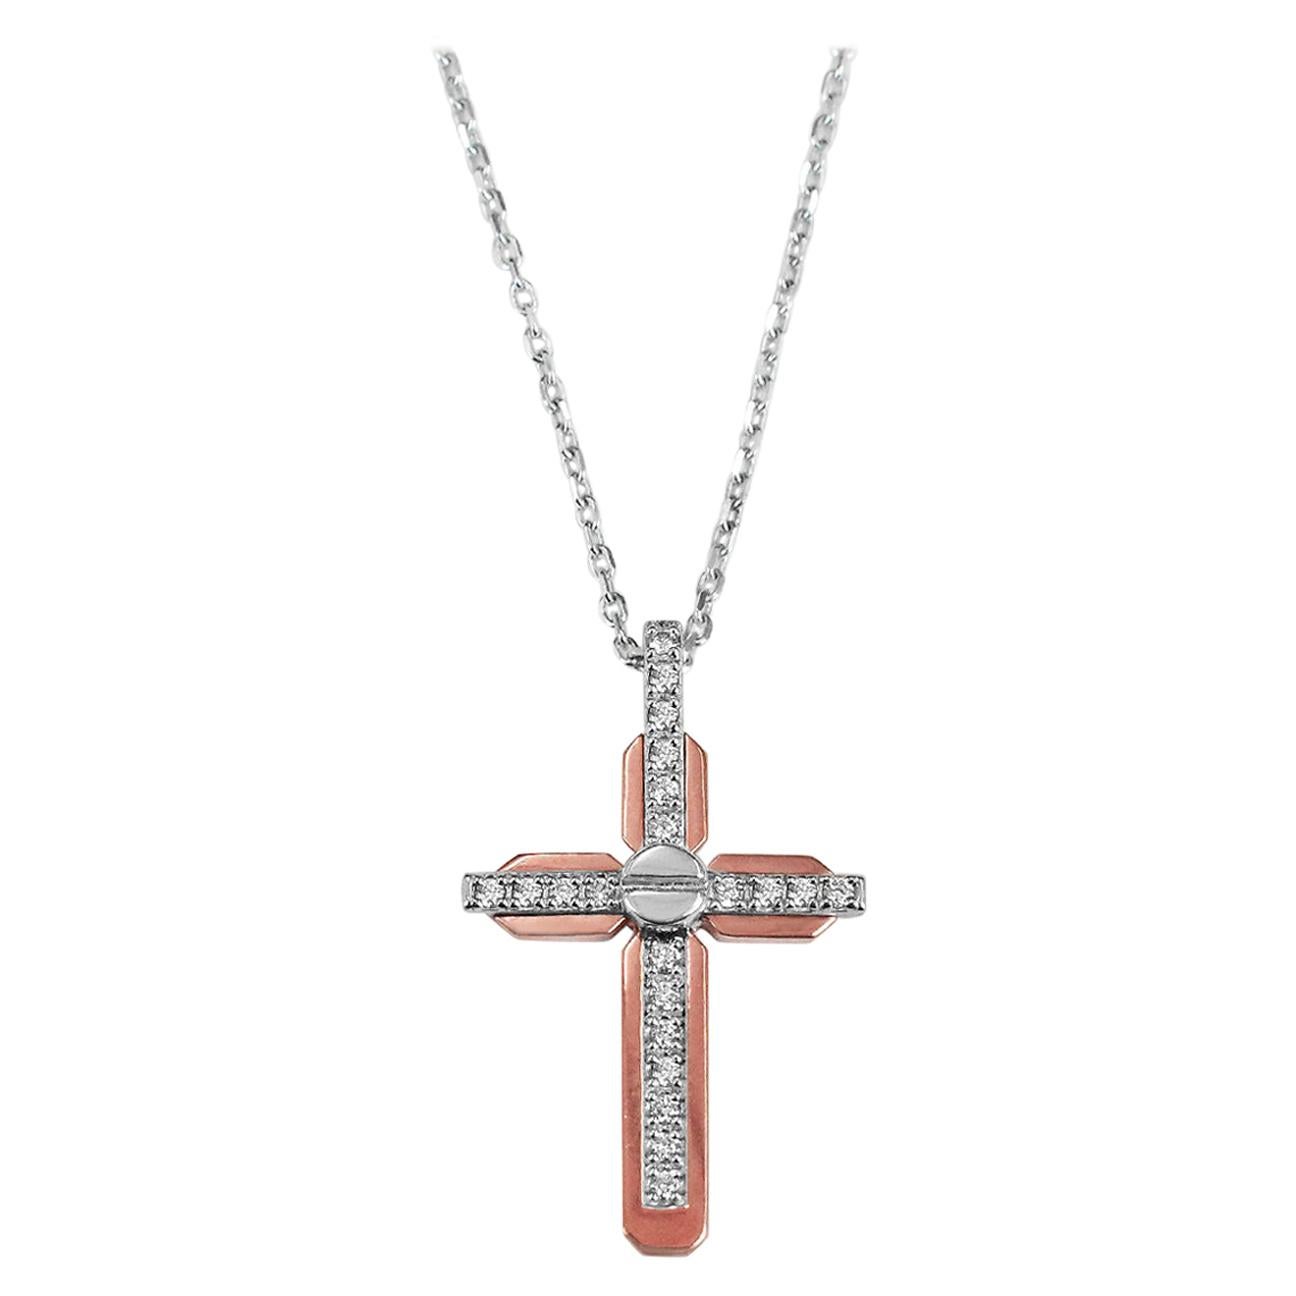 18Karat Gold Cross Pendant Necklace Two-Tone White Gold Rose Gold Diamond Pave Cross Pendant Necklace
           18K 2 tone white/rose gold cross pendant. A universal symbol of faith & belief, glittering diamonds showcased in truly timeless jewels